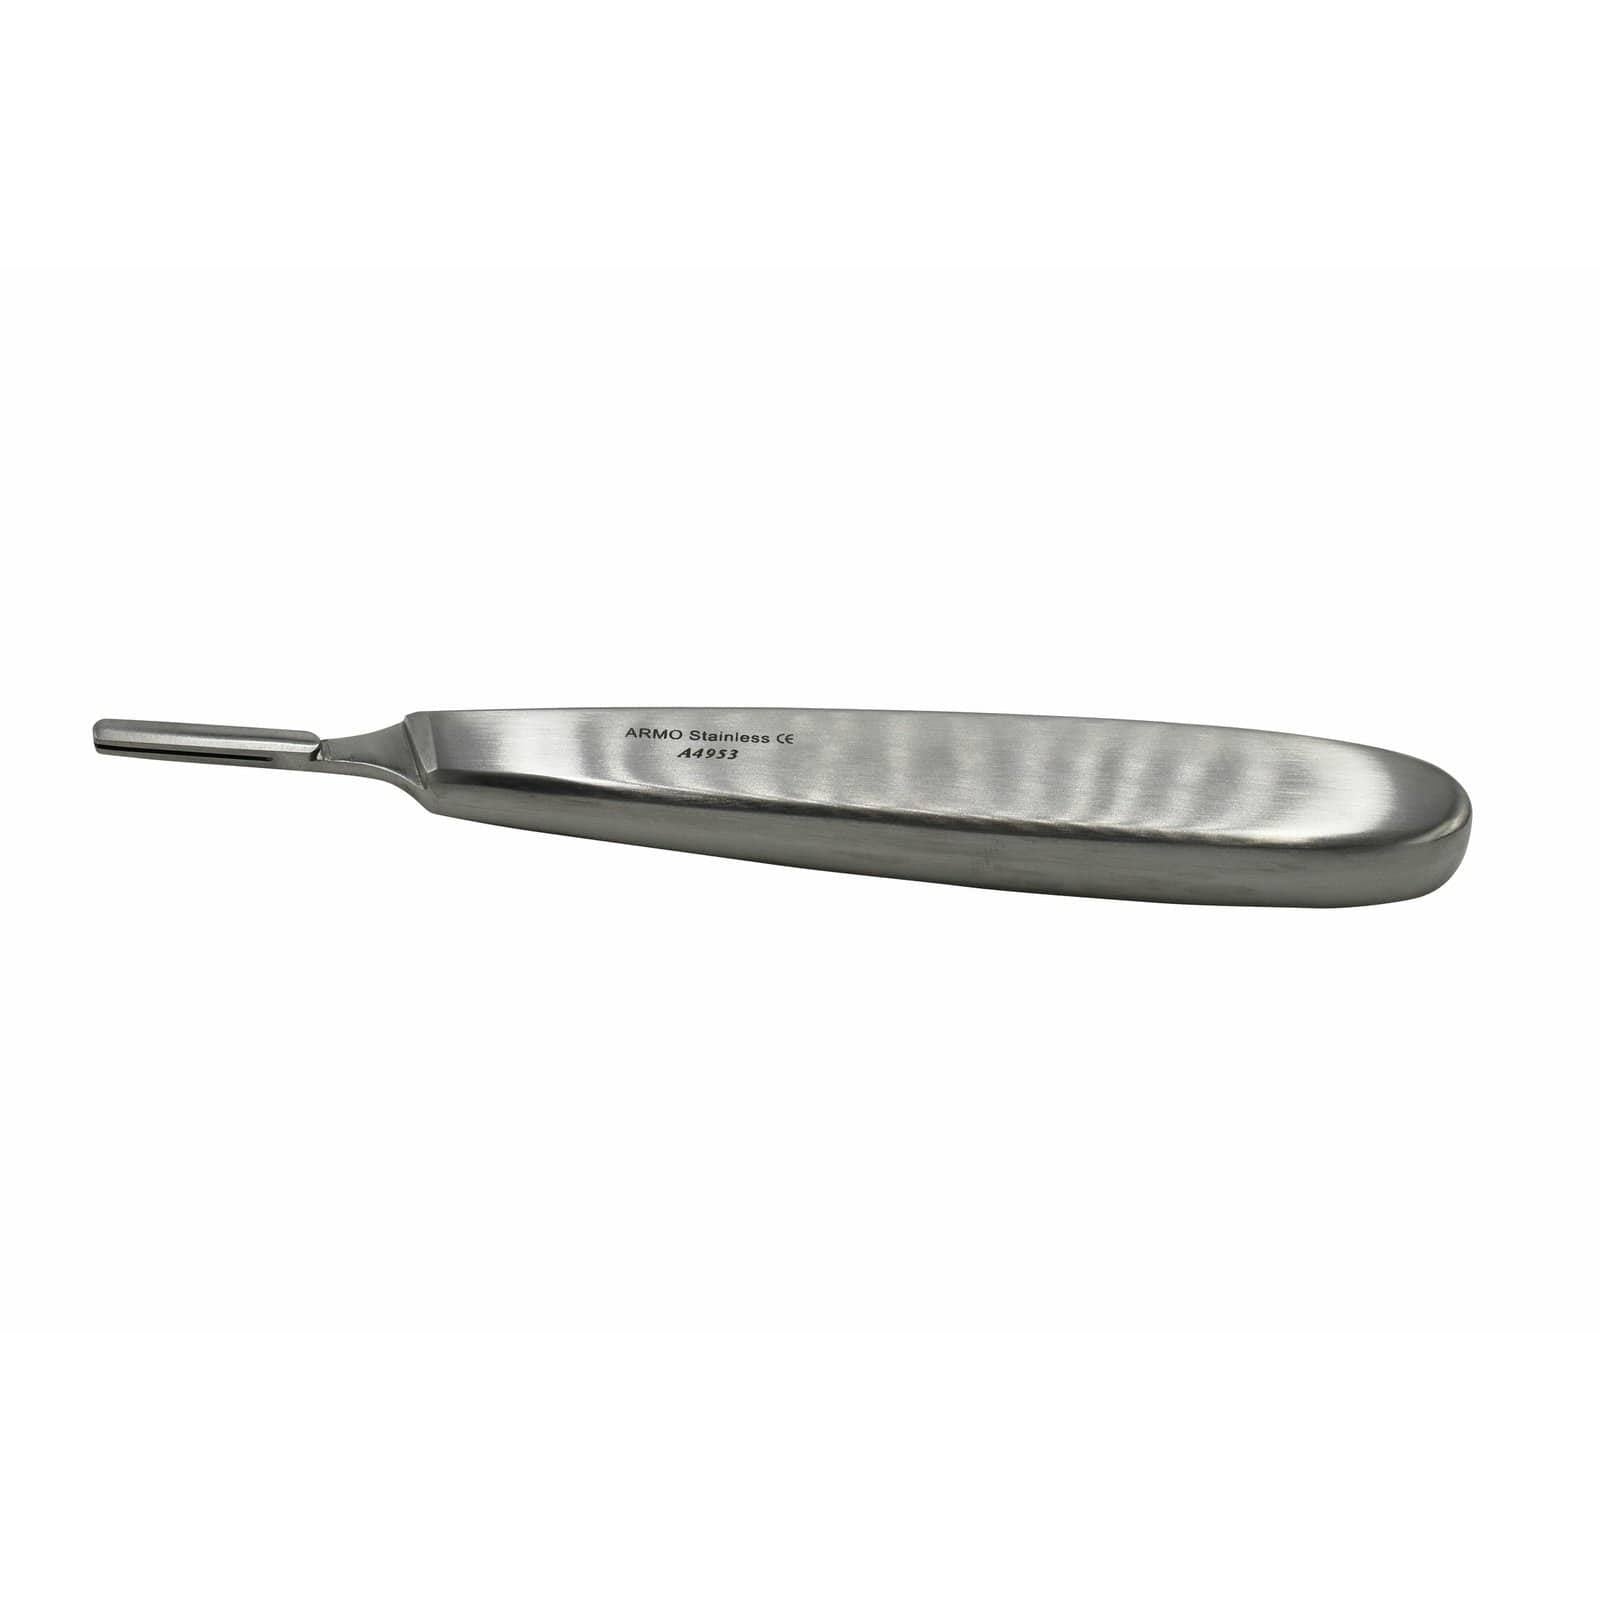 Armo Surgical Instruments #9 Hollow Armo Scalpel Handle